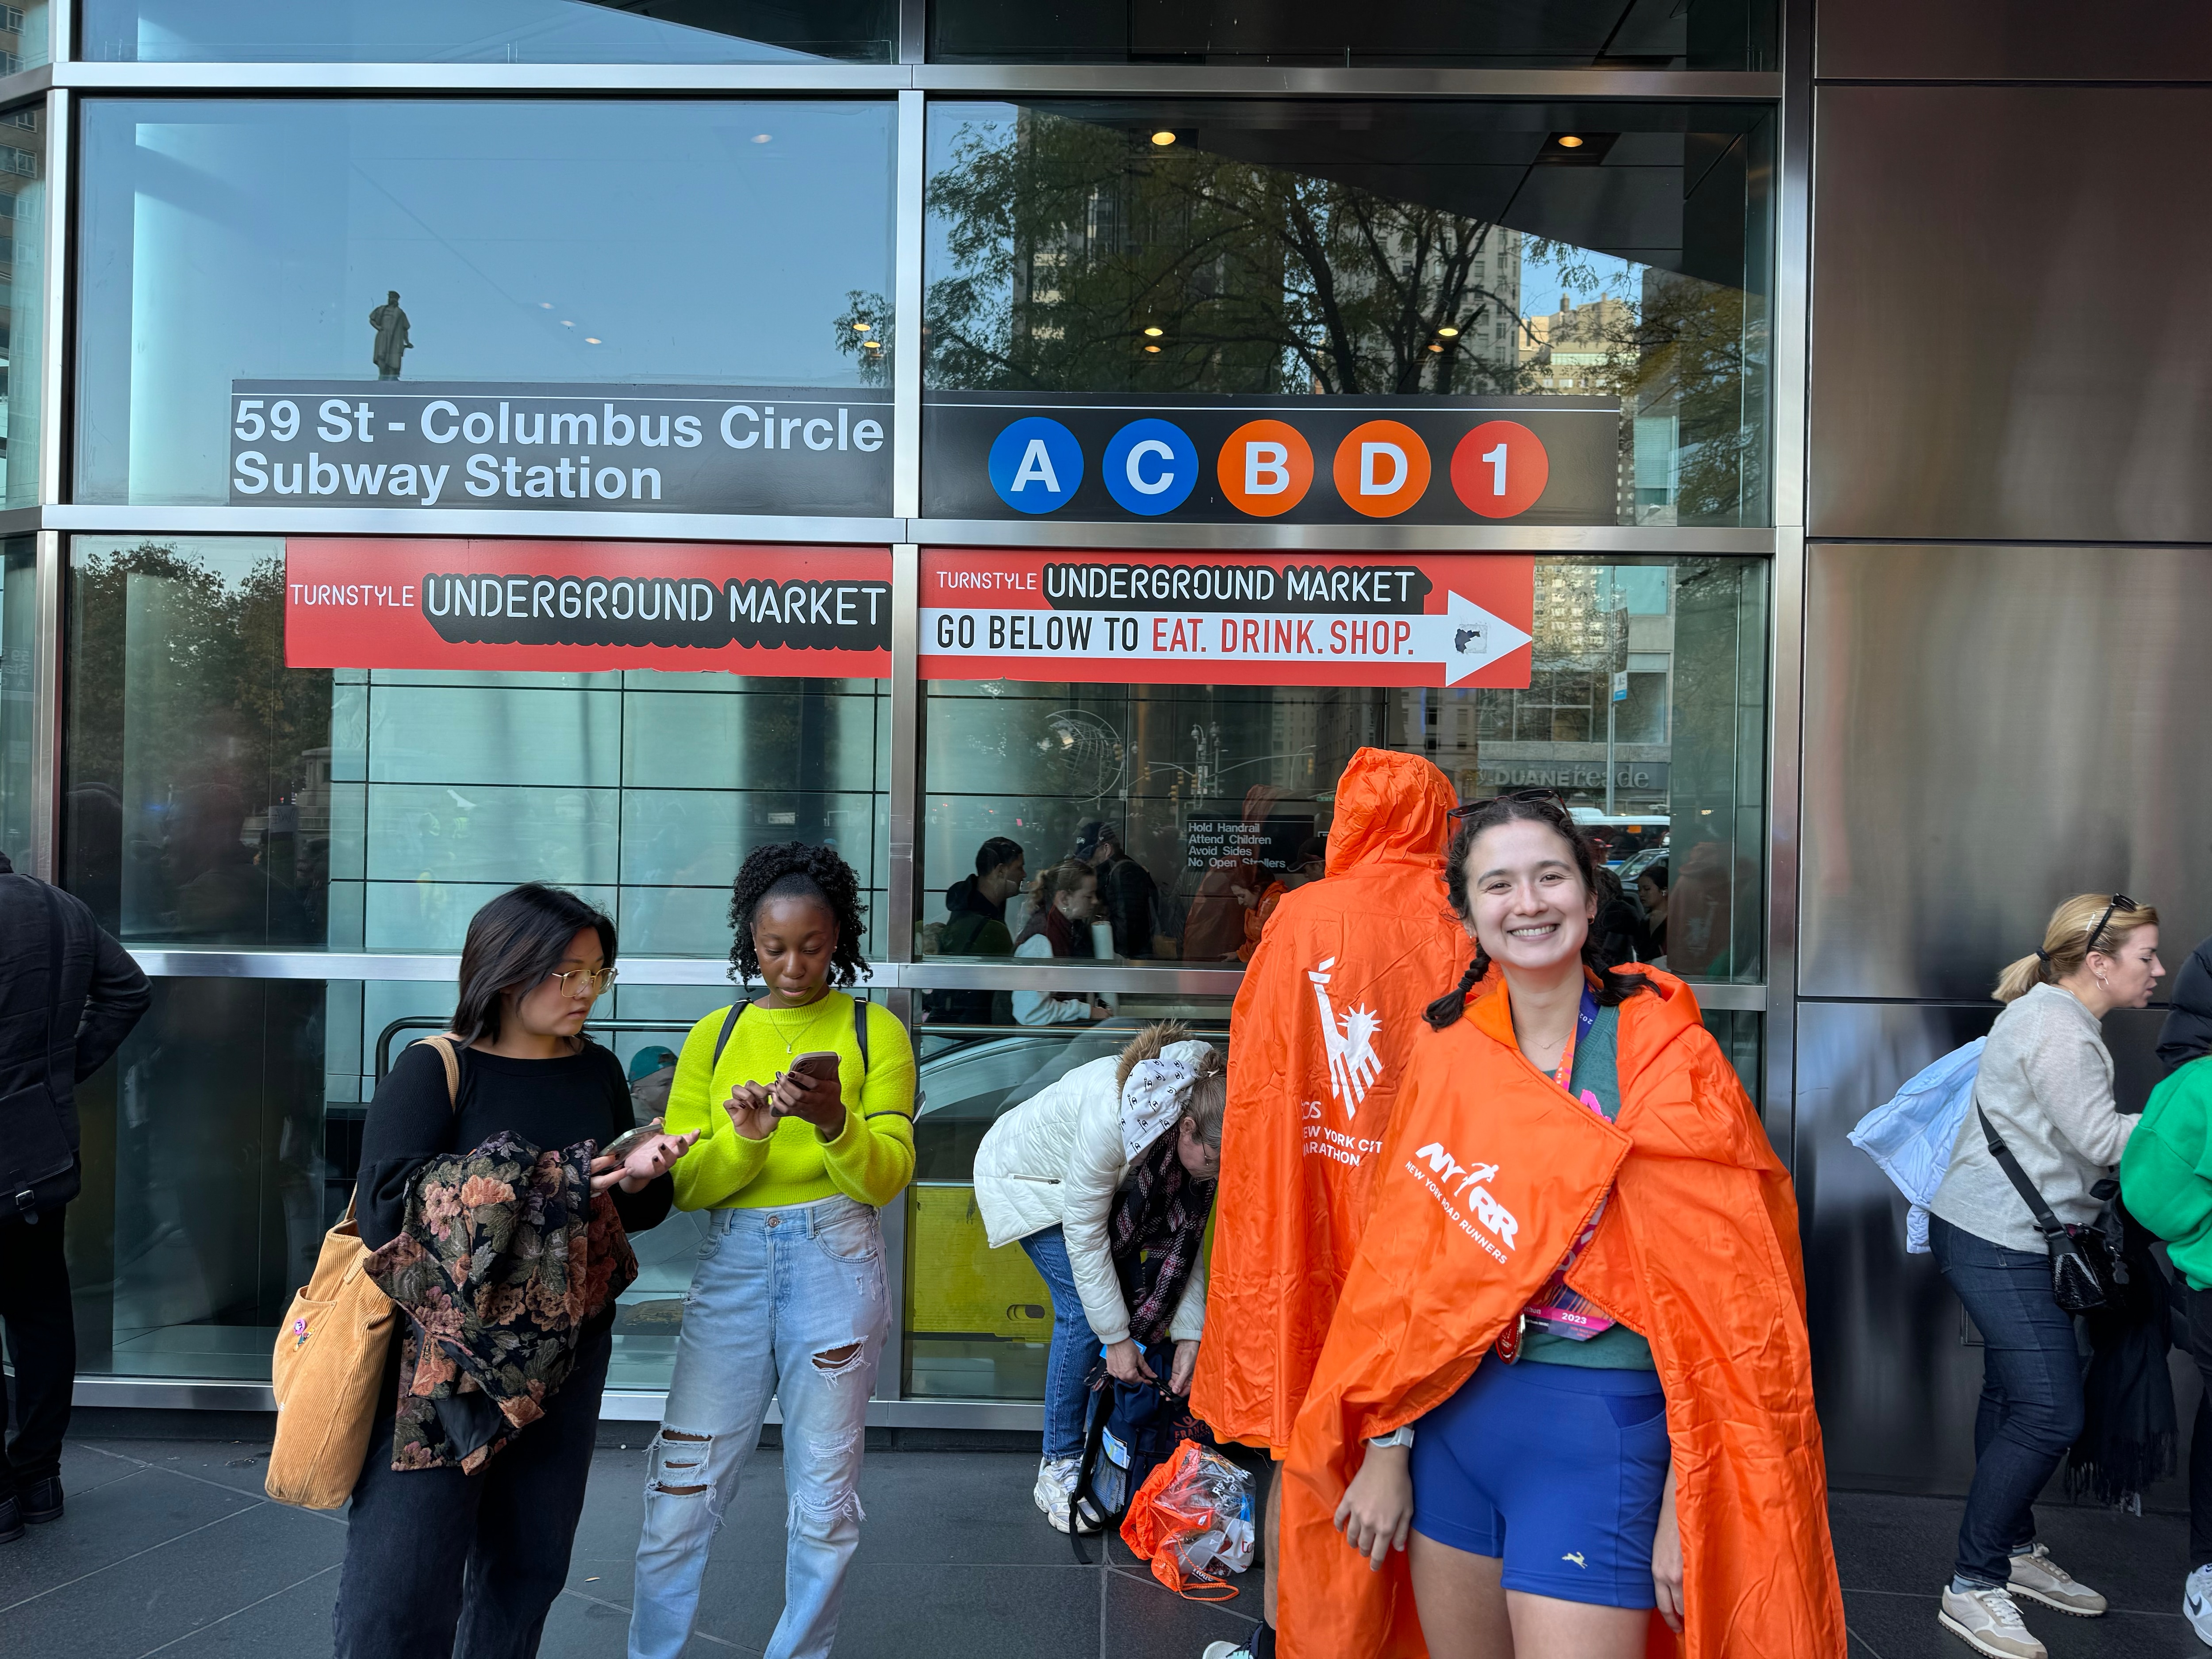 Lisa Mae Fiedler smiling and wearing an orange New York Road Runners poncho in front of the 59 St-Columbus Circle A C B D 1 subway station after finishing the 2023 New York City Marathon.